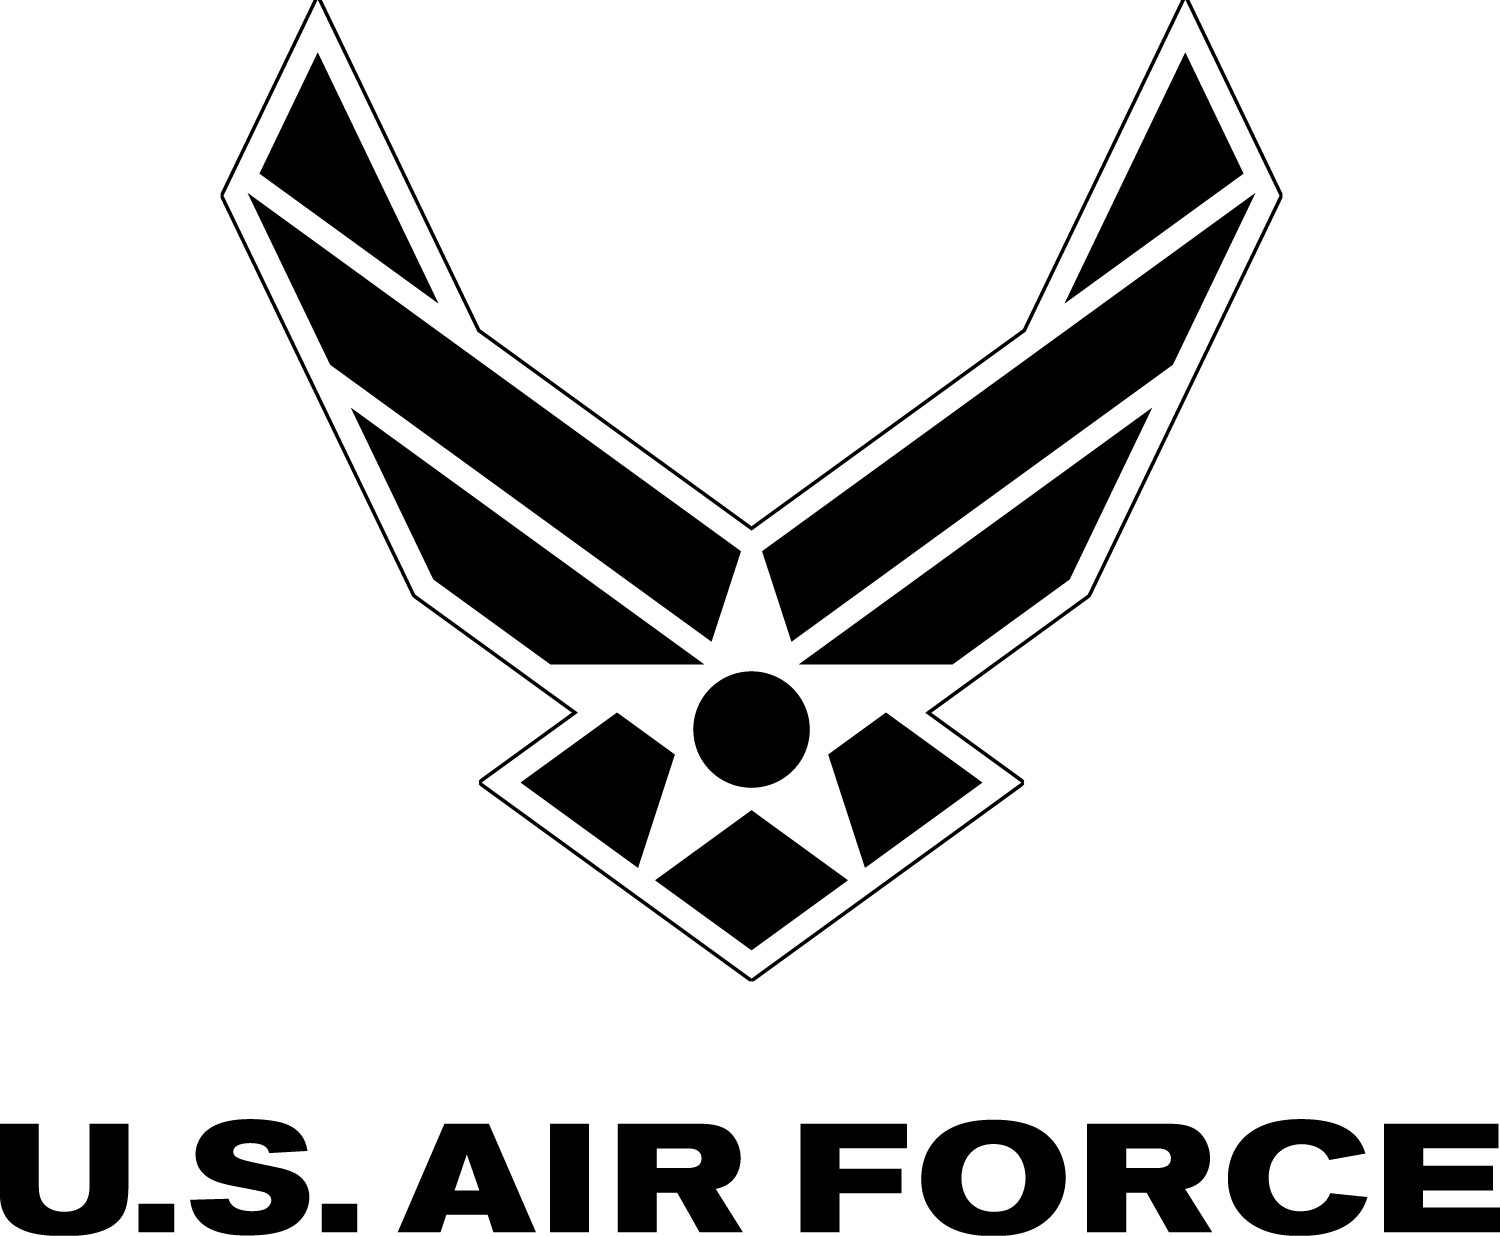 Air Force symbol with logotype, black 